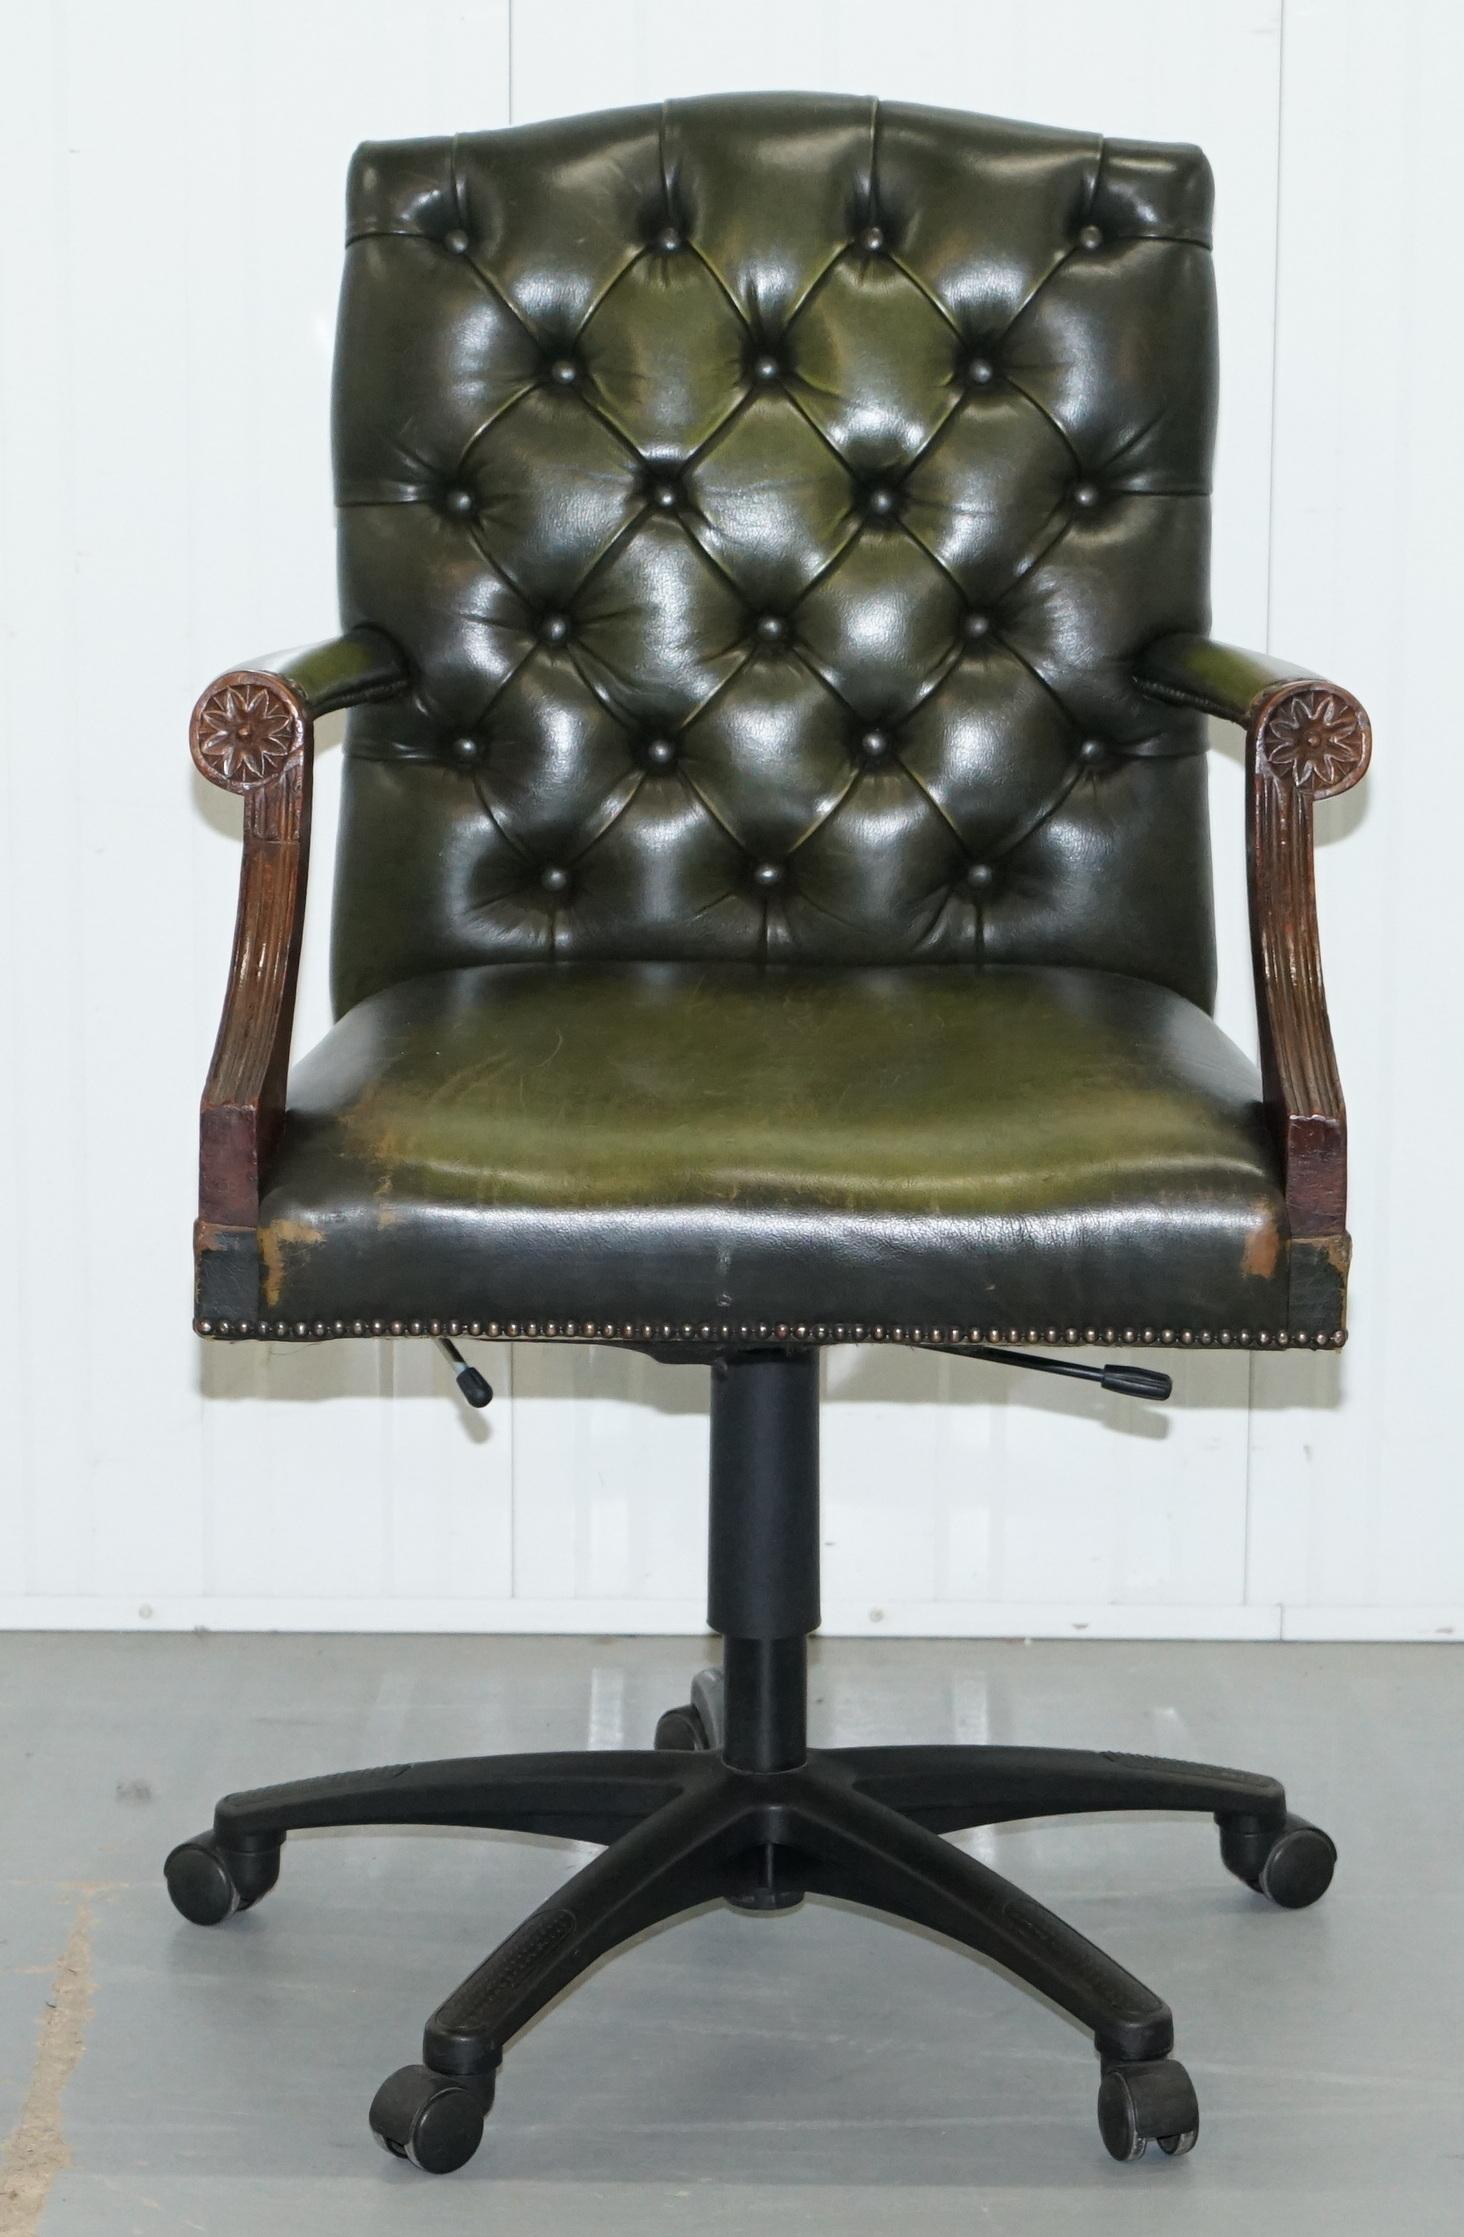 We are delighted to offer for sale this lovely vintage Bevan Funnel directors green leather captains office chair with new gas lift base

This is a very rare chair from their early collection, they still make the same model today, the modern